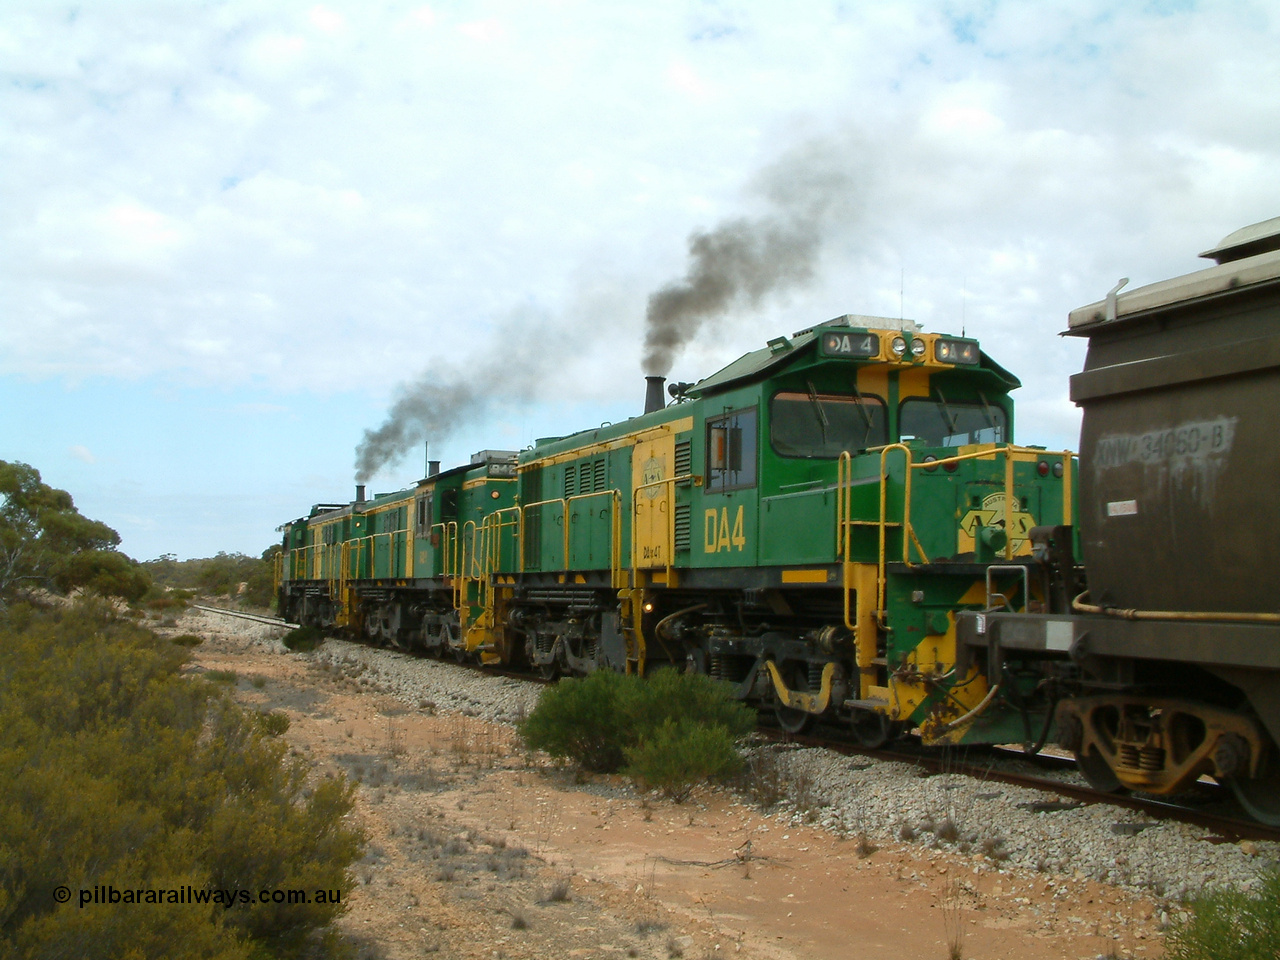 030409 121224
Kielpa, a few kilometres south of the former Konanda siding loaded grain train with 830 class unit 851 AE Goodwin ALCo model DL531 serial 84137, 851 has spent its entire operating career on the Eyre Peninsula, leads fellow 830 class 842 serial 84140 and a rebuilt unit DA 4, rebuilt from 830 class unit 839 by Port Augusta Workshops, retains original serial 83730 and model DL531 with the first twelve waggons behind the locos XNW type powers away from a crew change.
Keywords: DA-class;DA4;83730;Port-Augusta-WS;ALCo;DL531G/1;830-class;839;rebuild;